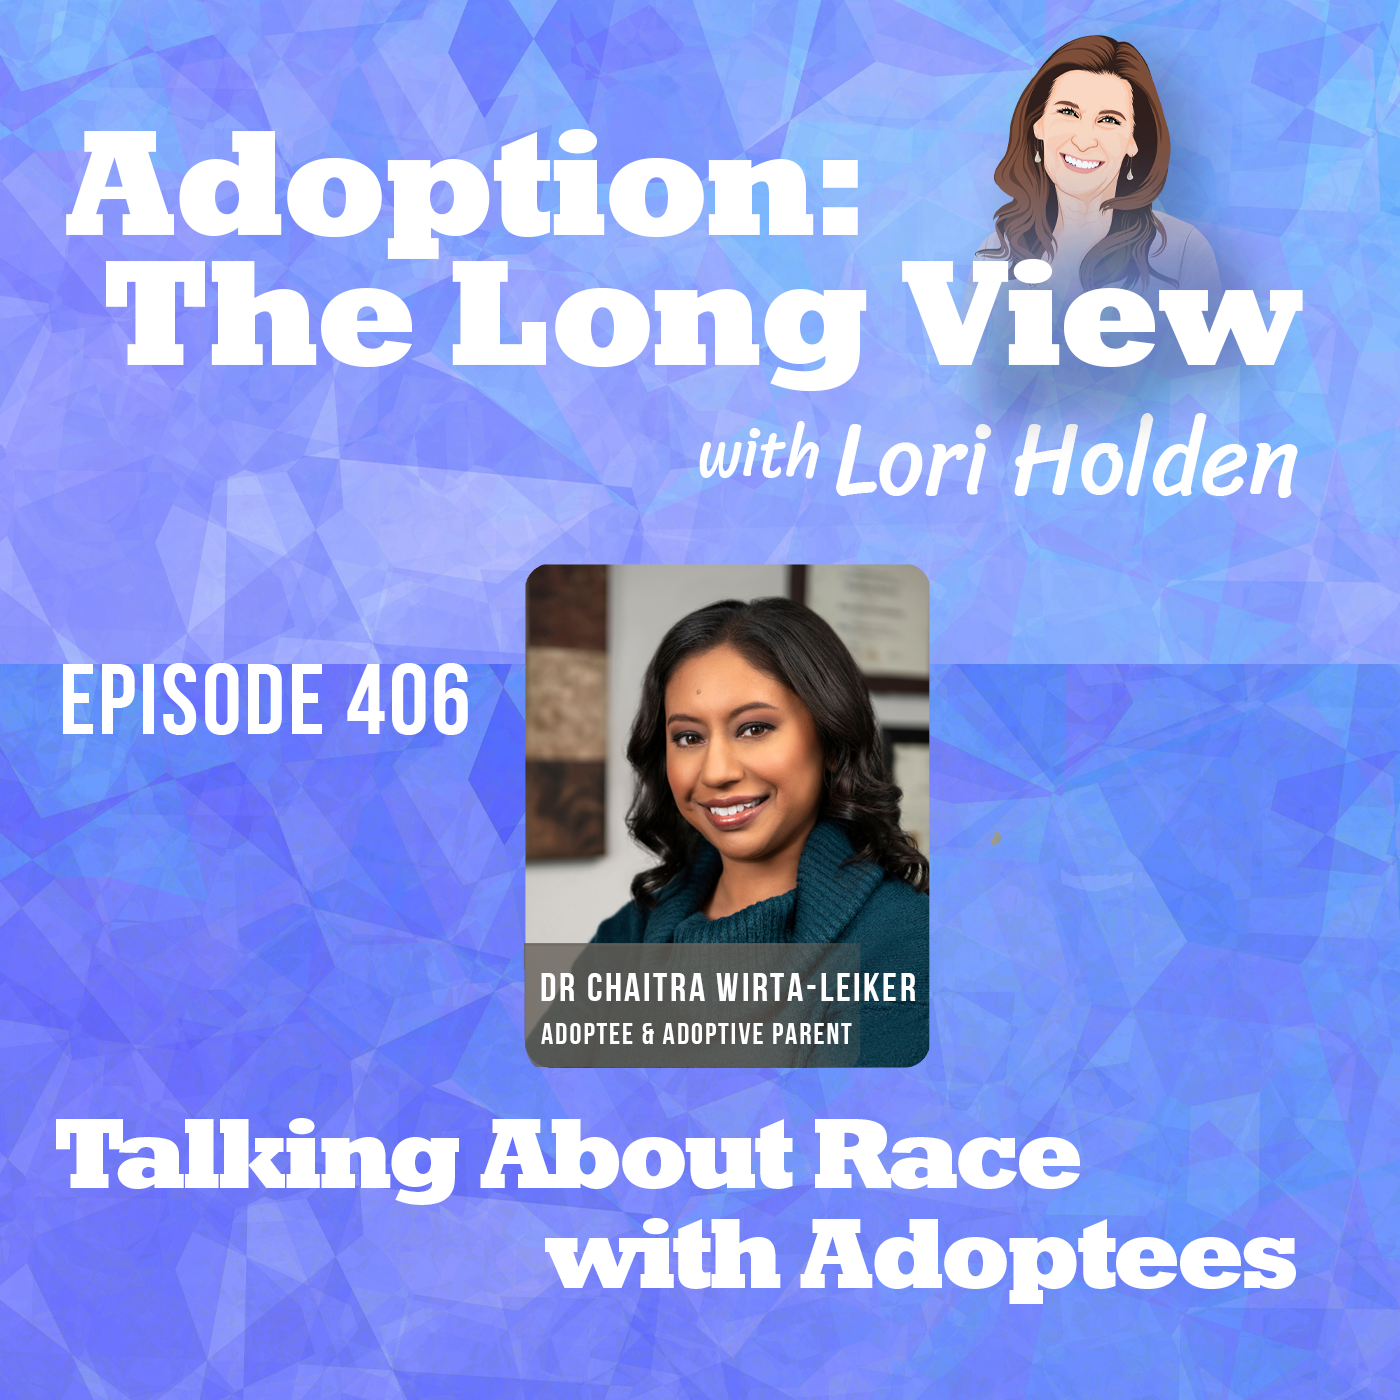 talking about race with adoptees with Dr Chaitra